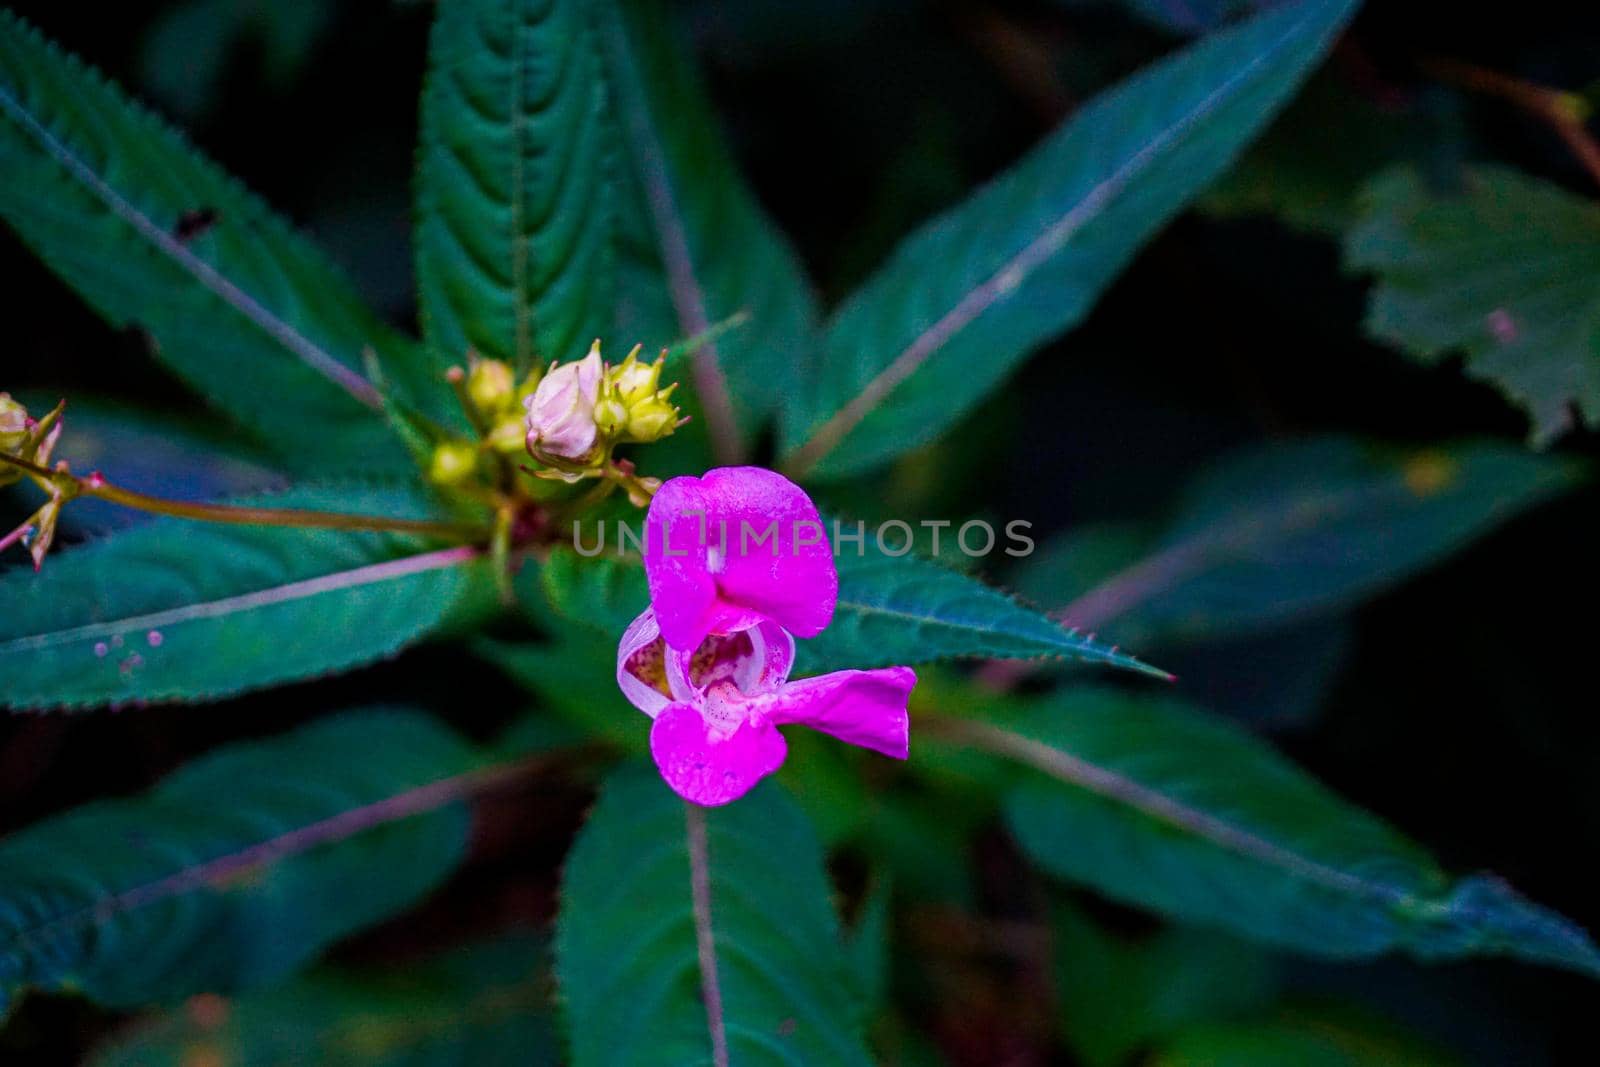 Impatiens glandulifera - also known as policeman's helmet, bobby tops, copper tops, and gnome's hatstand